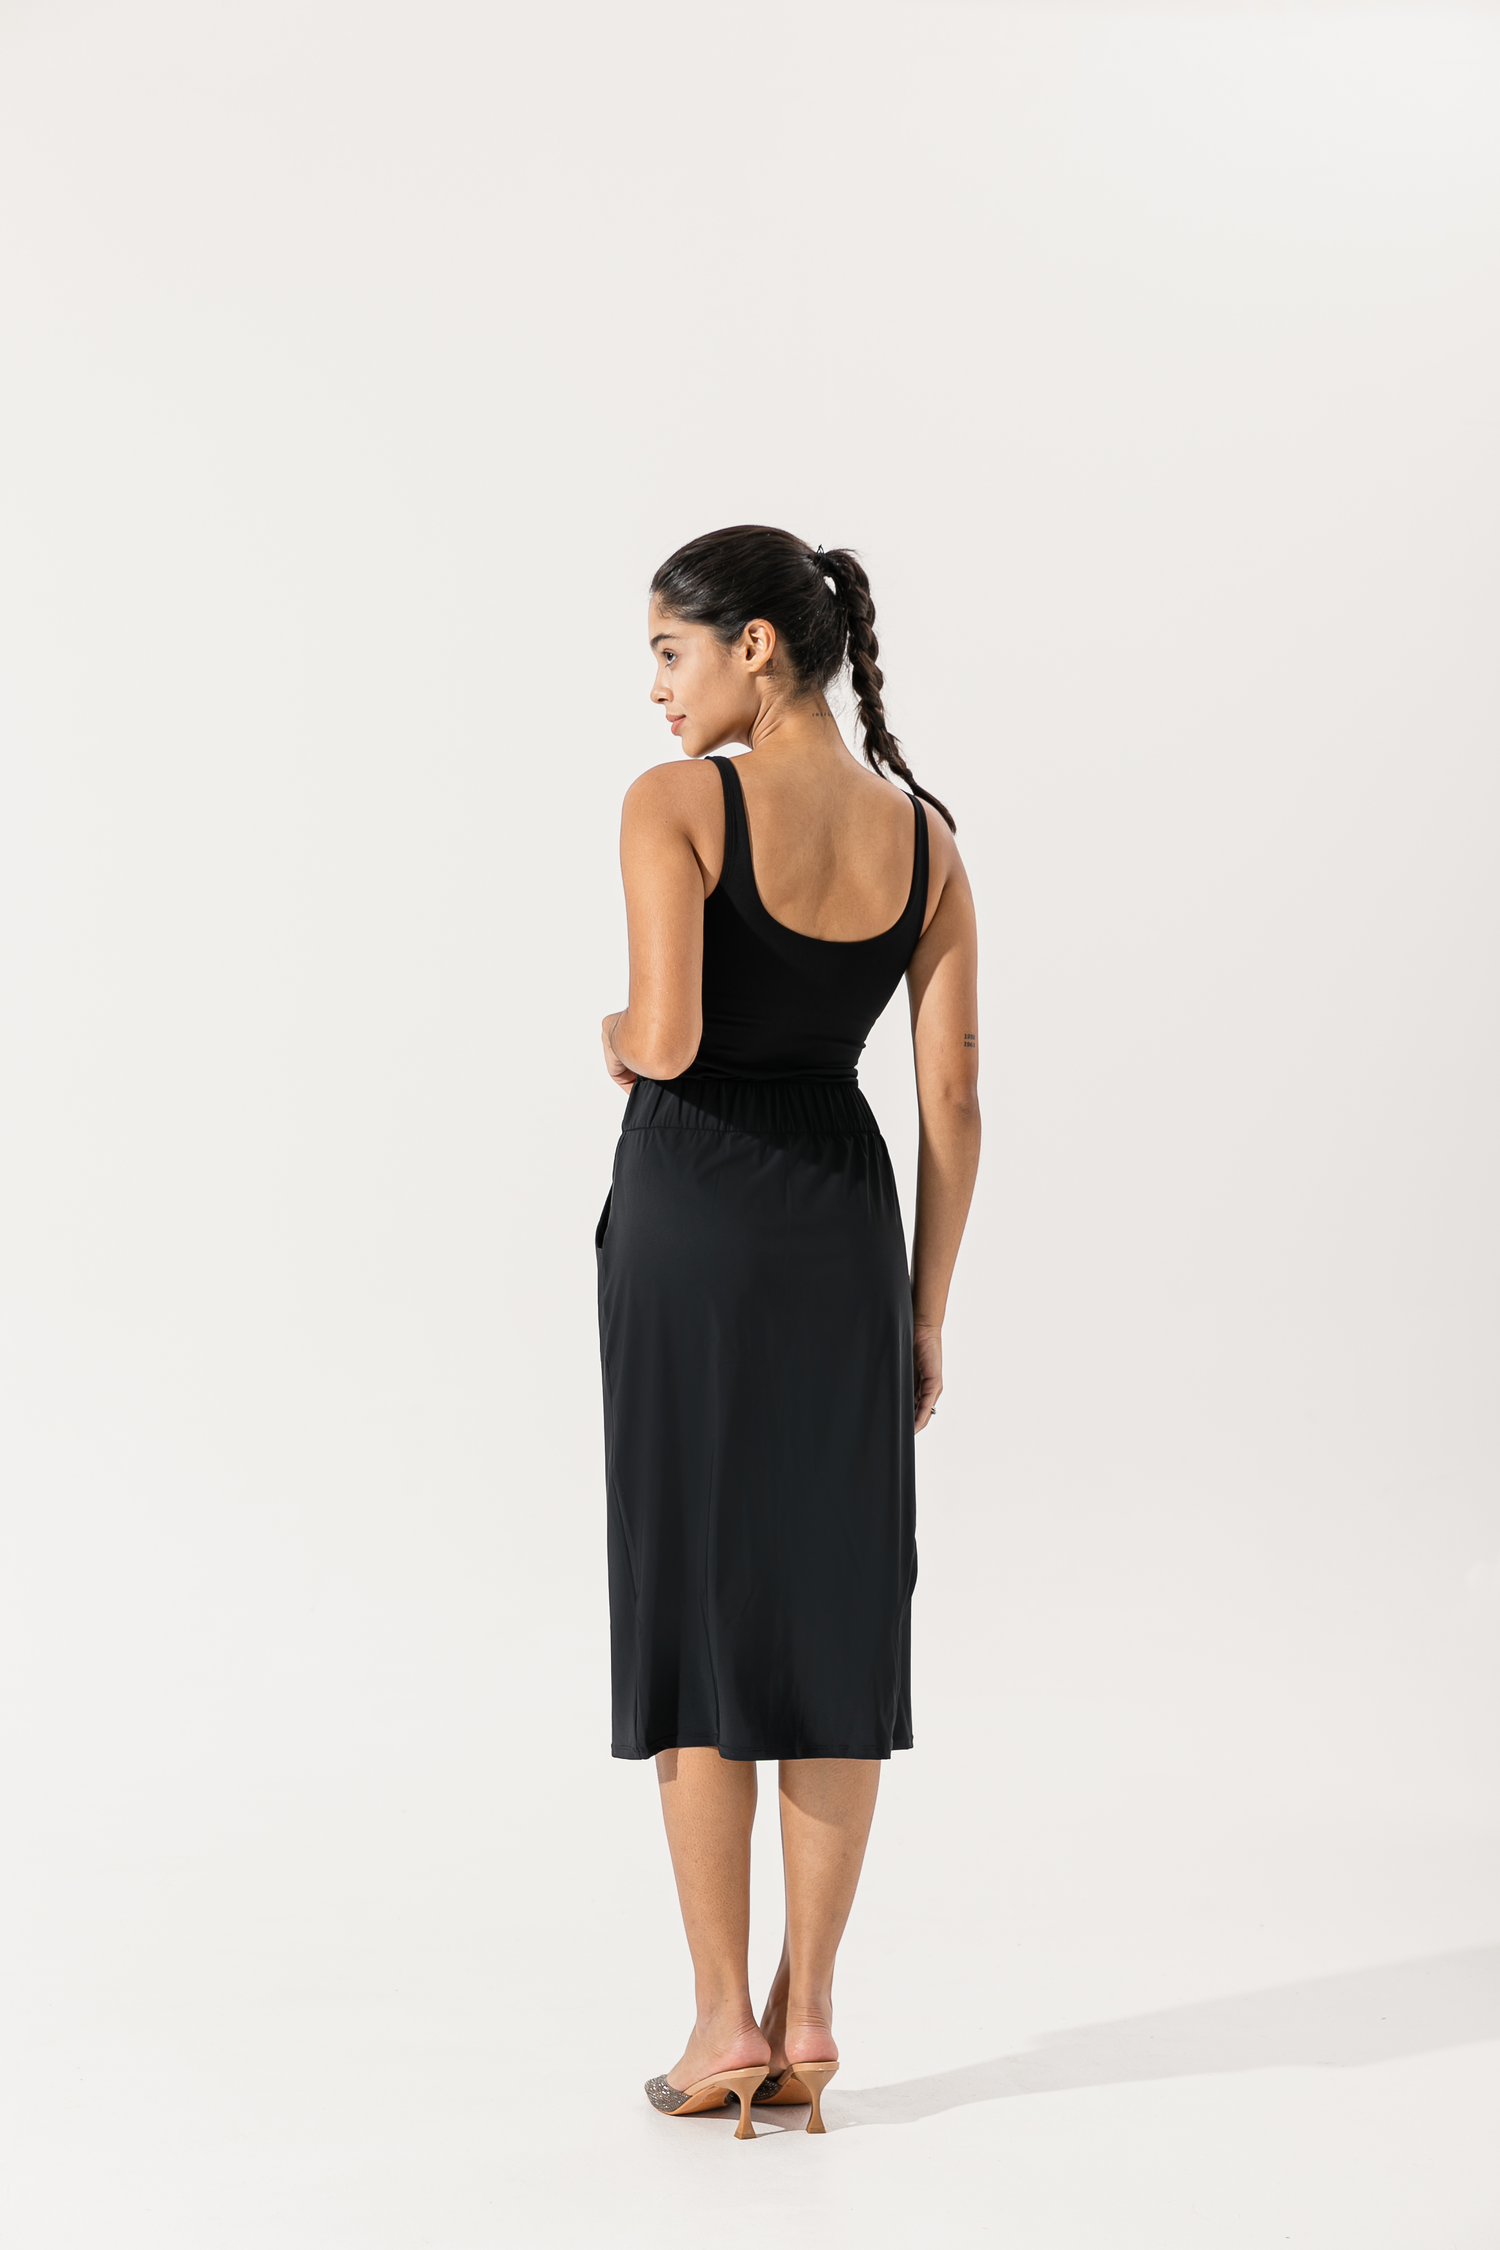 Stretchy & Cooling Timeless Skirt